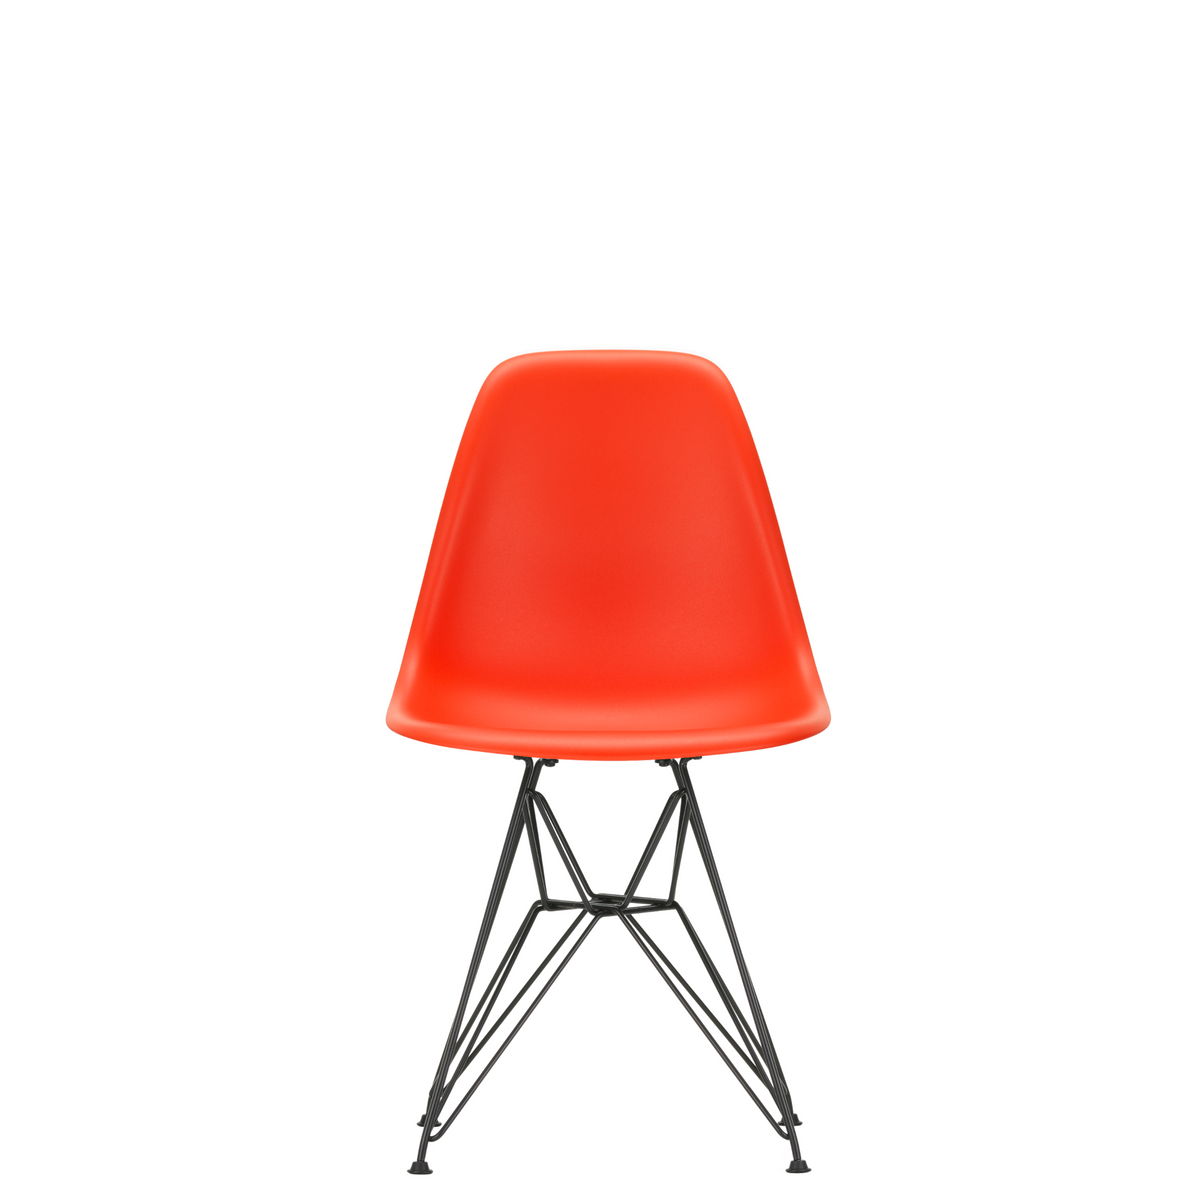 Vitra Eames Plastic Side Chair DSR Powder Coated for Outdoor Use Poppy Red Shell Black Powdercoated Base